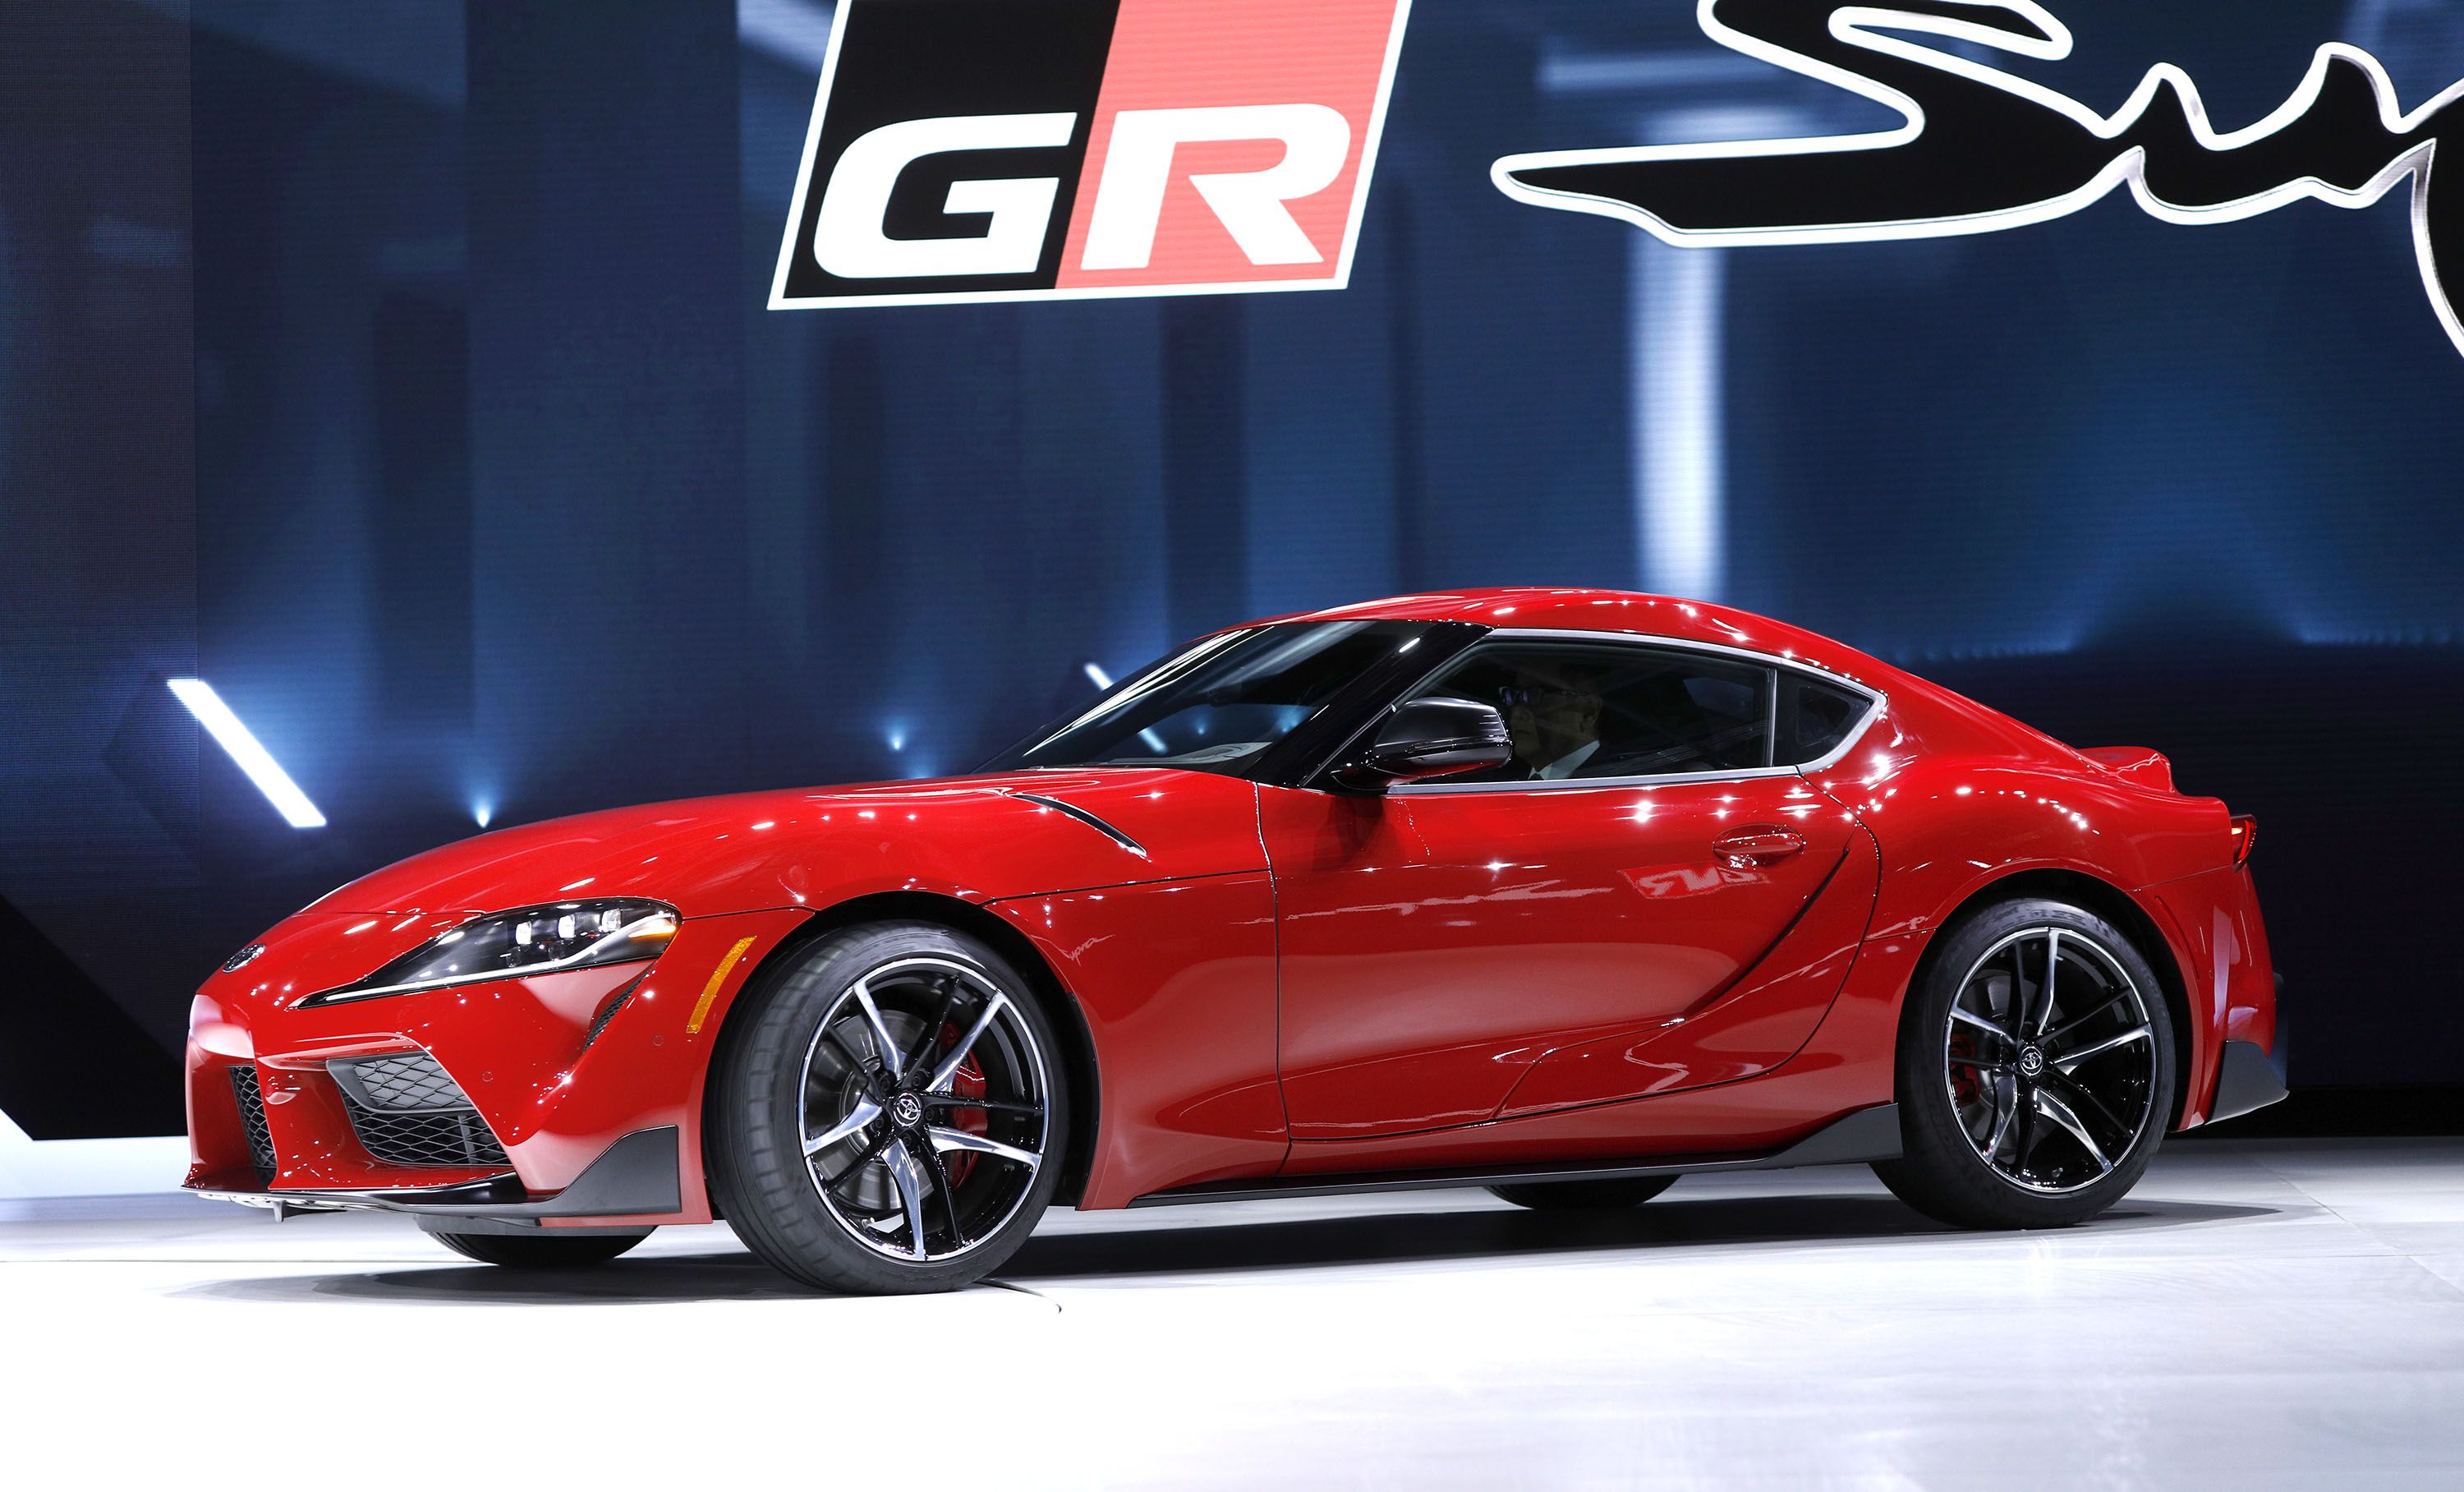 the-2020-toyota-supra-rear-wheel-drive-sports-coupe-is-news-photo-1082216004-1547483344.jpg